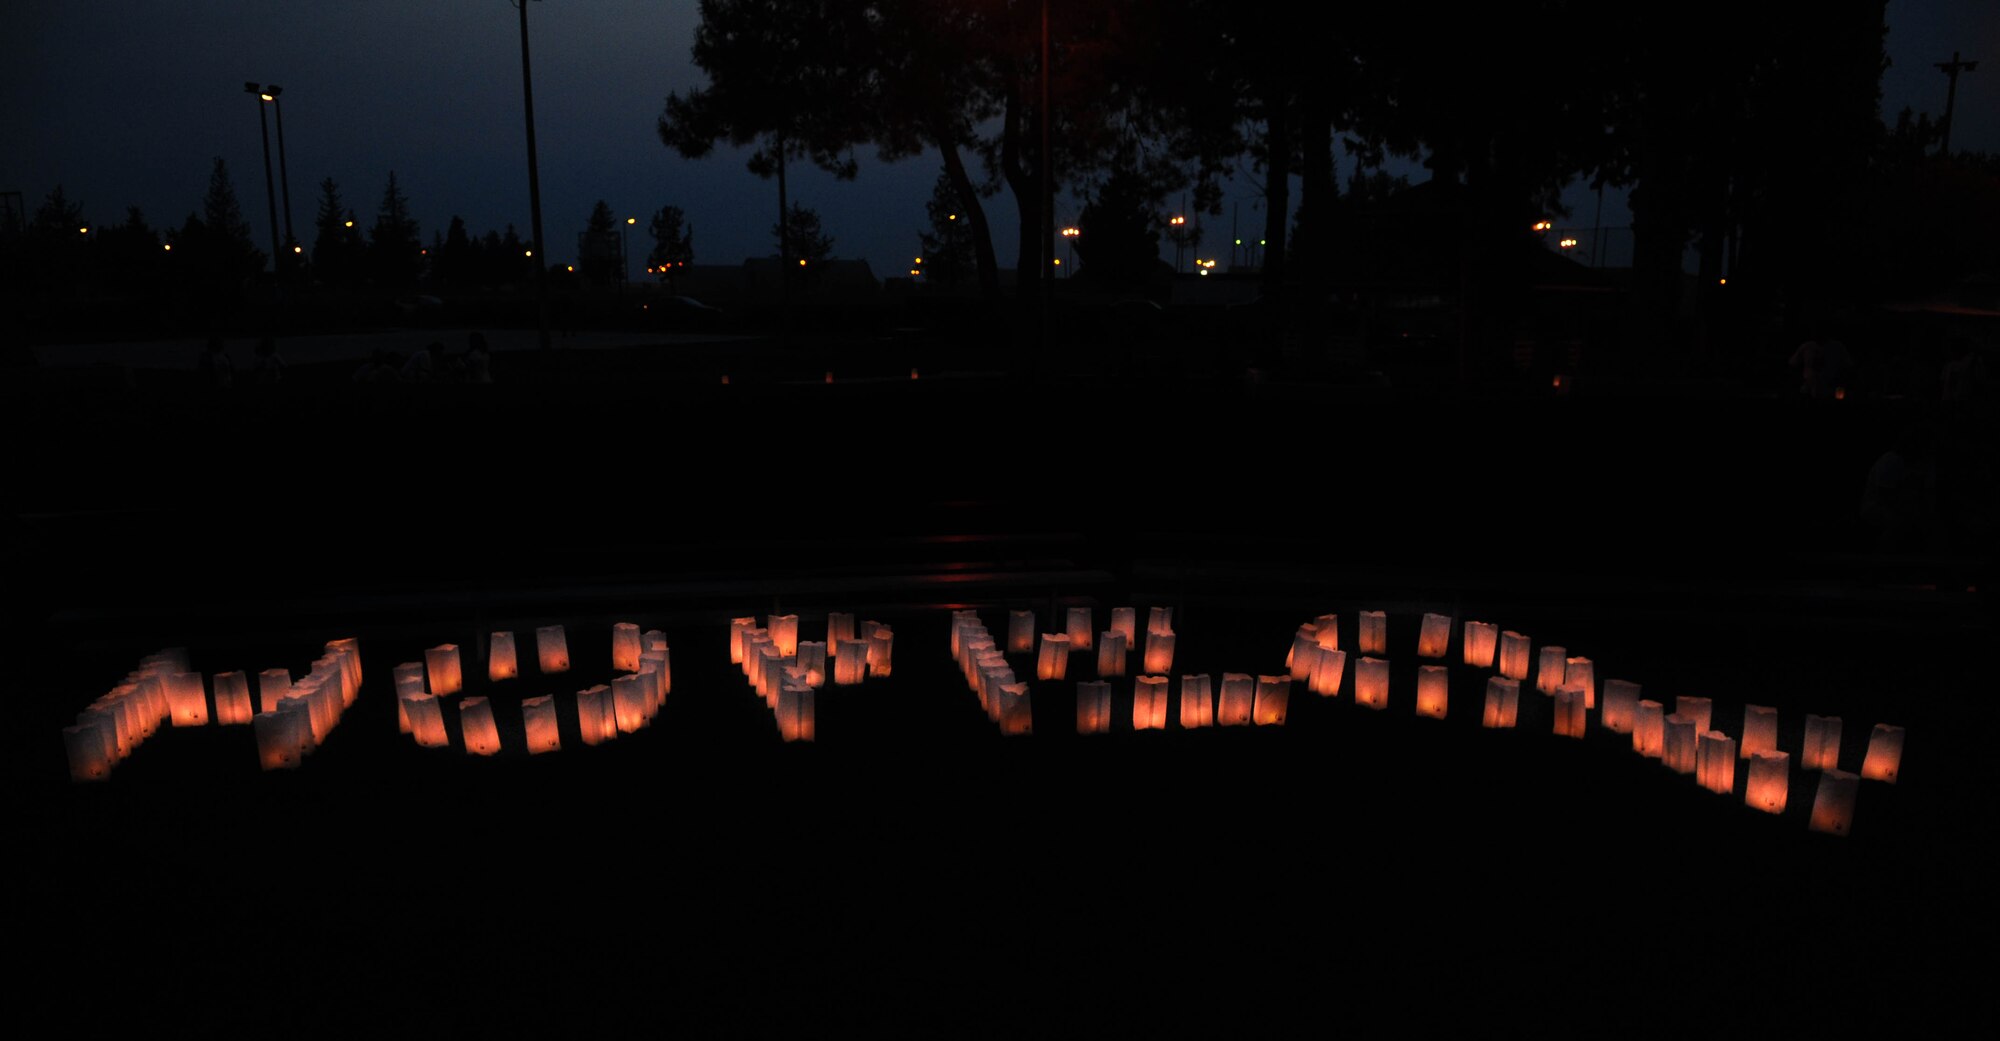 Luminary bags spell the word “hope” during the luminary ceremony for Relay for Life Saturday, May 8, 2010 at Arkadas Park at Incirlik Air Base, Turkey.  The luminary ceremony is held to honor cancer survivors and those who have passed away.  Team Incirlik helped raise more than $23,000 for Relay for Life this year.  (U.S. Air Force photo/Senior Airman Ashley Wood)